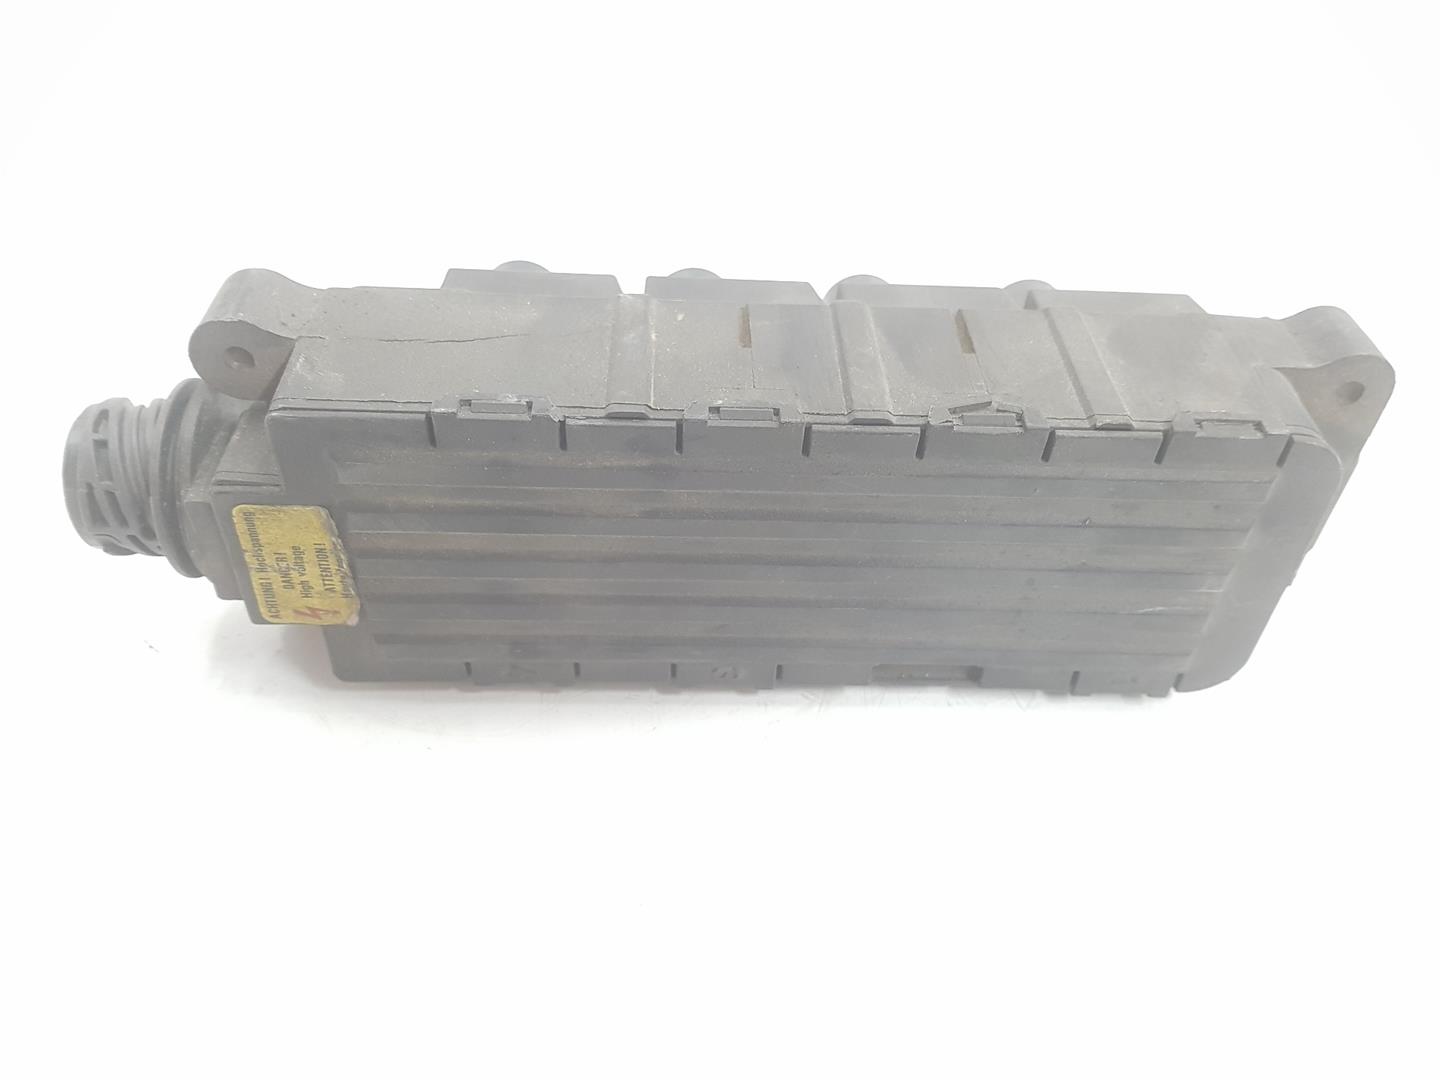 BMW 3 Series E36 (1990-2000) High Voltage Ignition Coil 0221503005, 12131247281, 1141CB 23751724